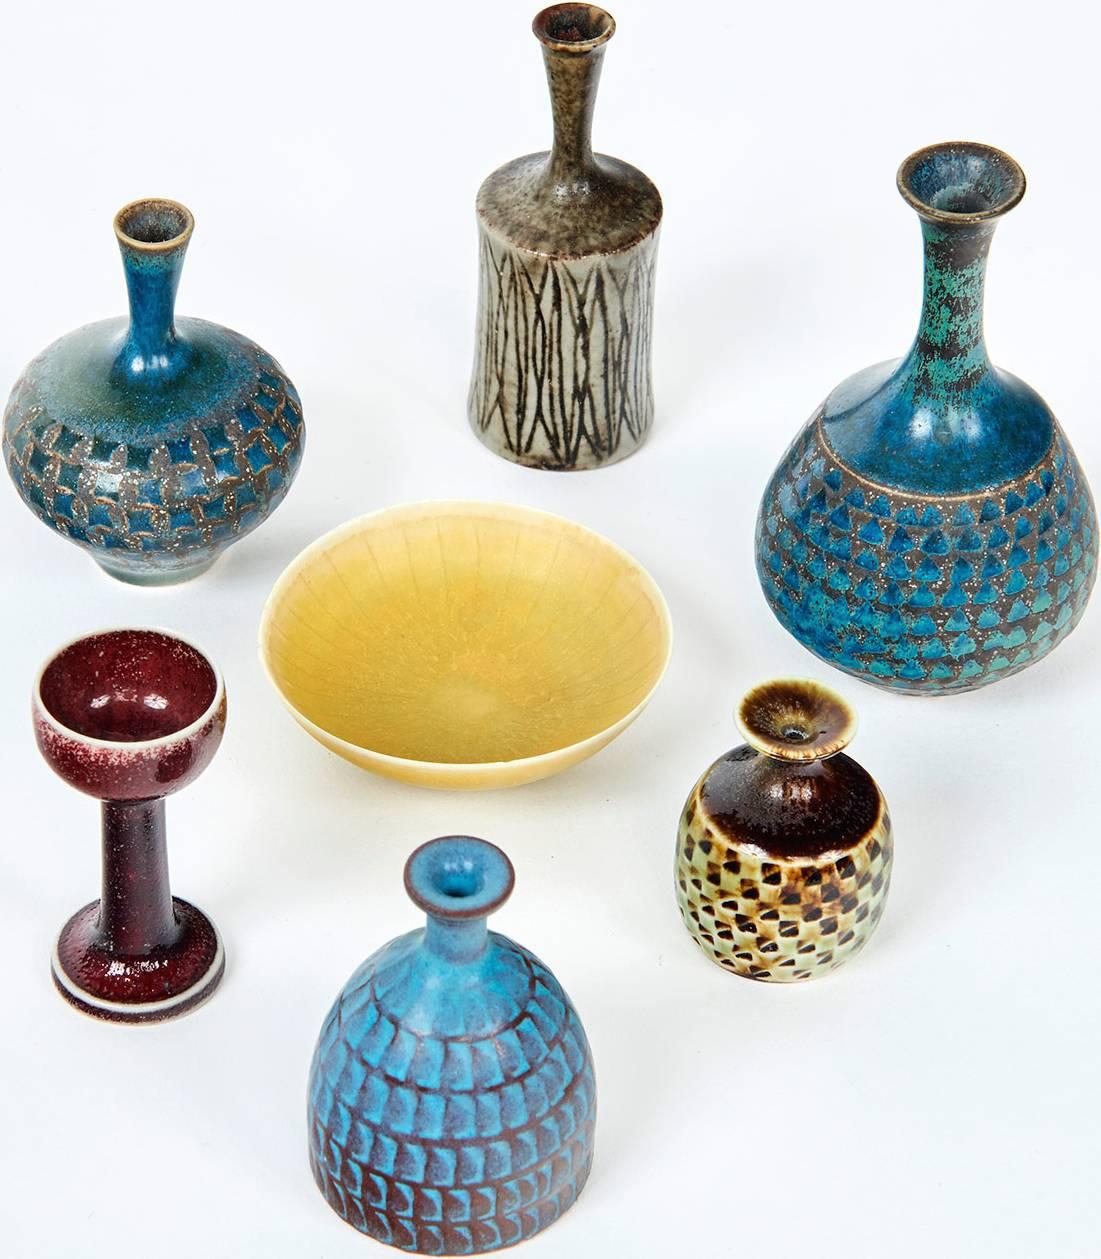 Nothing displays the mastery of a ceramist better than the ability to throw, on a potter's wheel, perfectly formed vessels of ridiculously small dimensions. Made with special wooden tools, these miniature stoneware vessels -- five vases, a chalice,